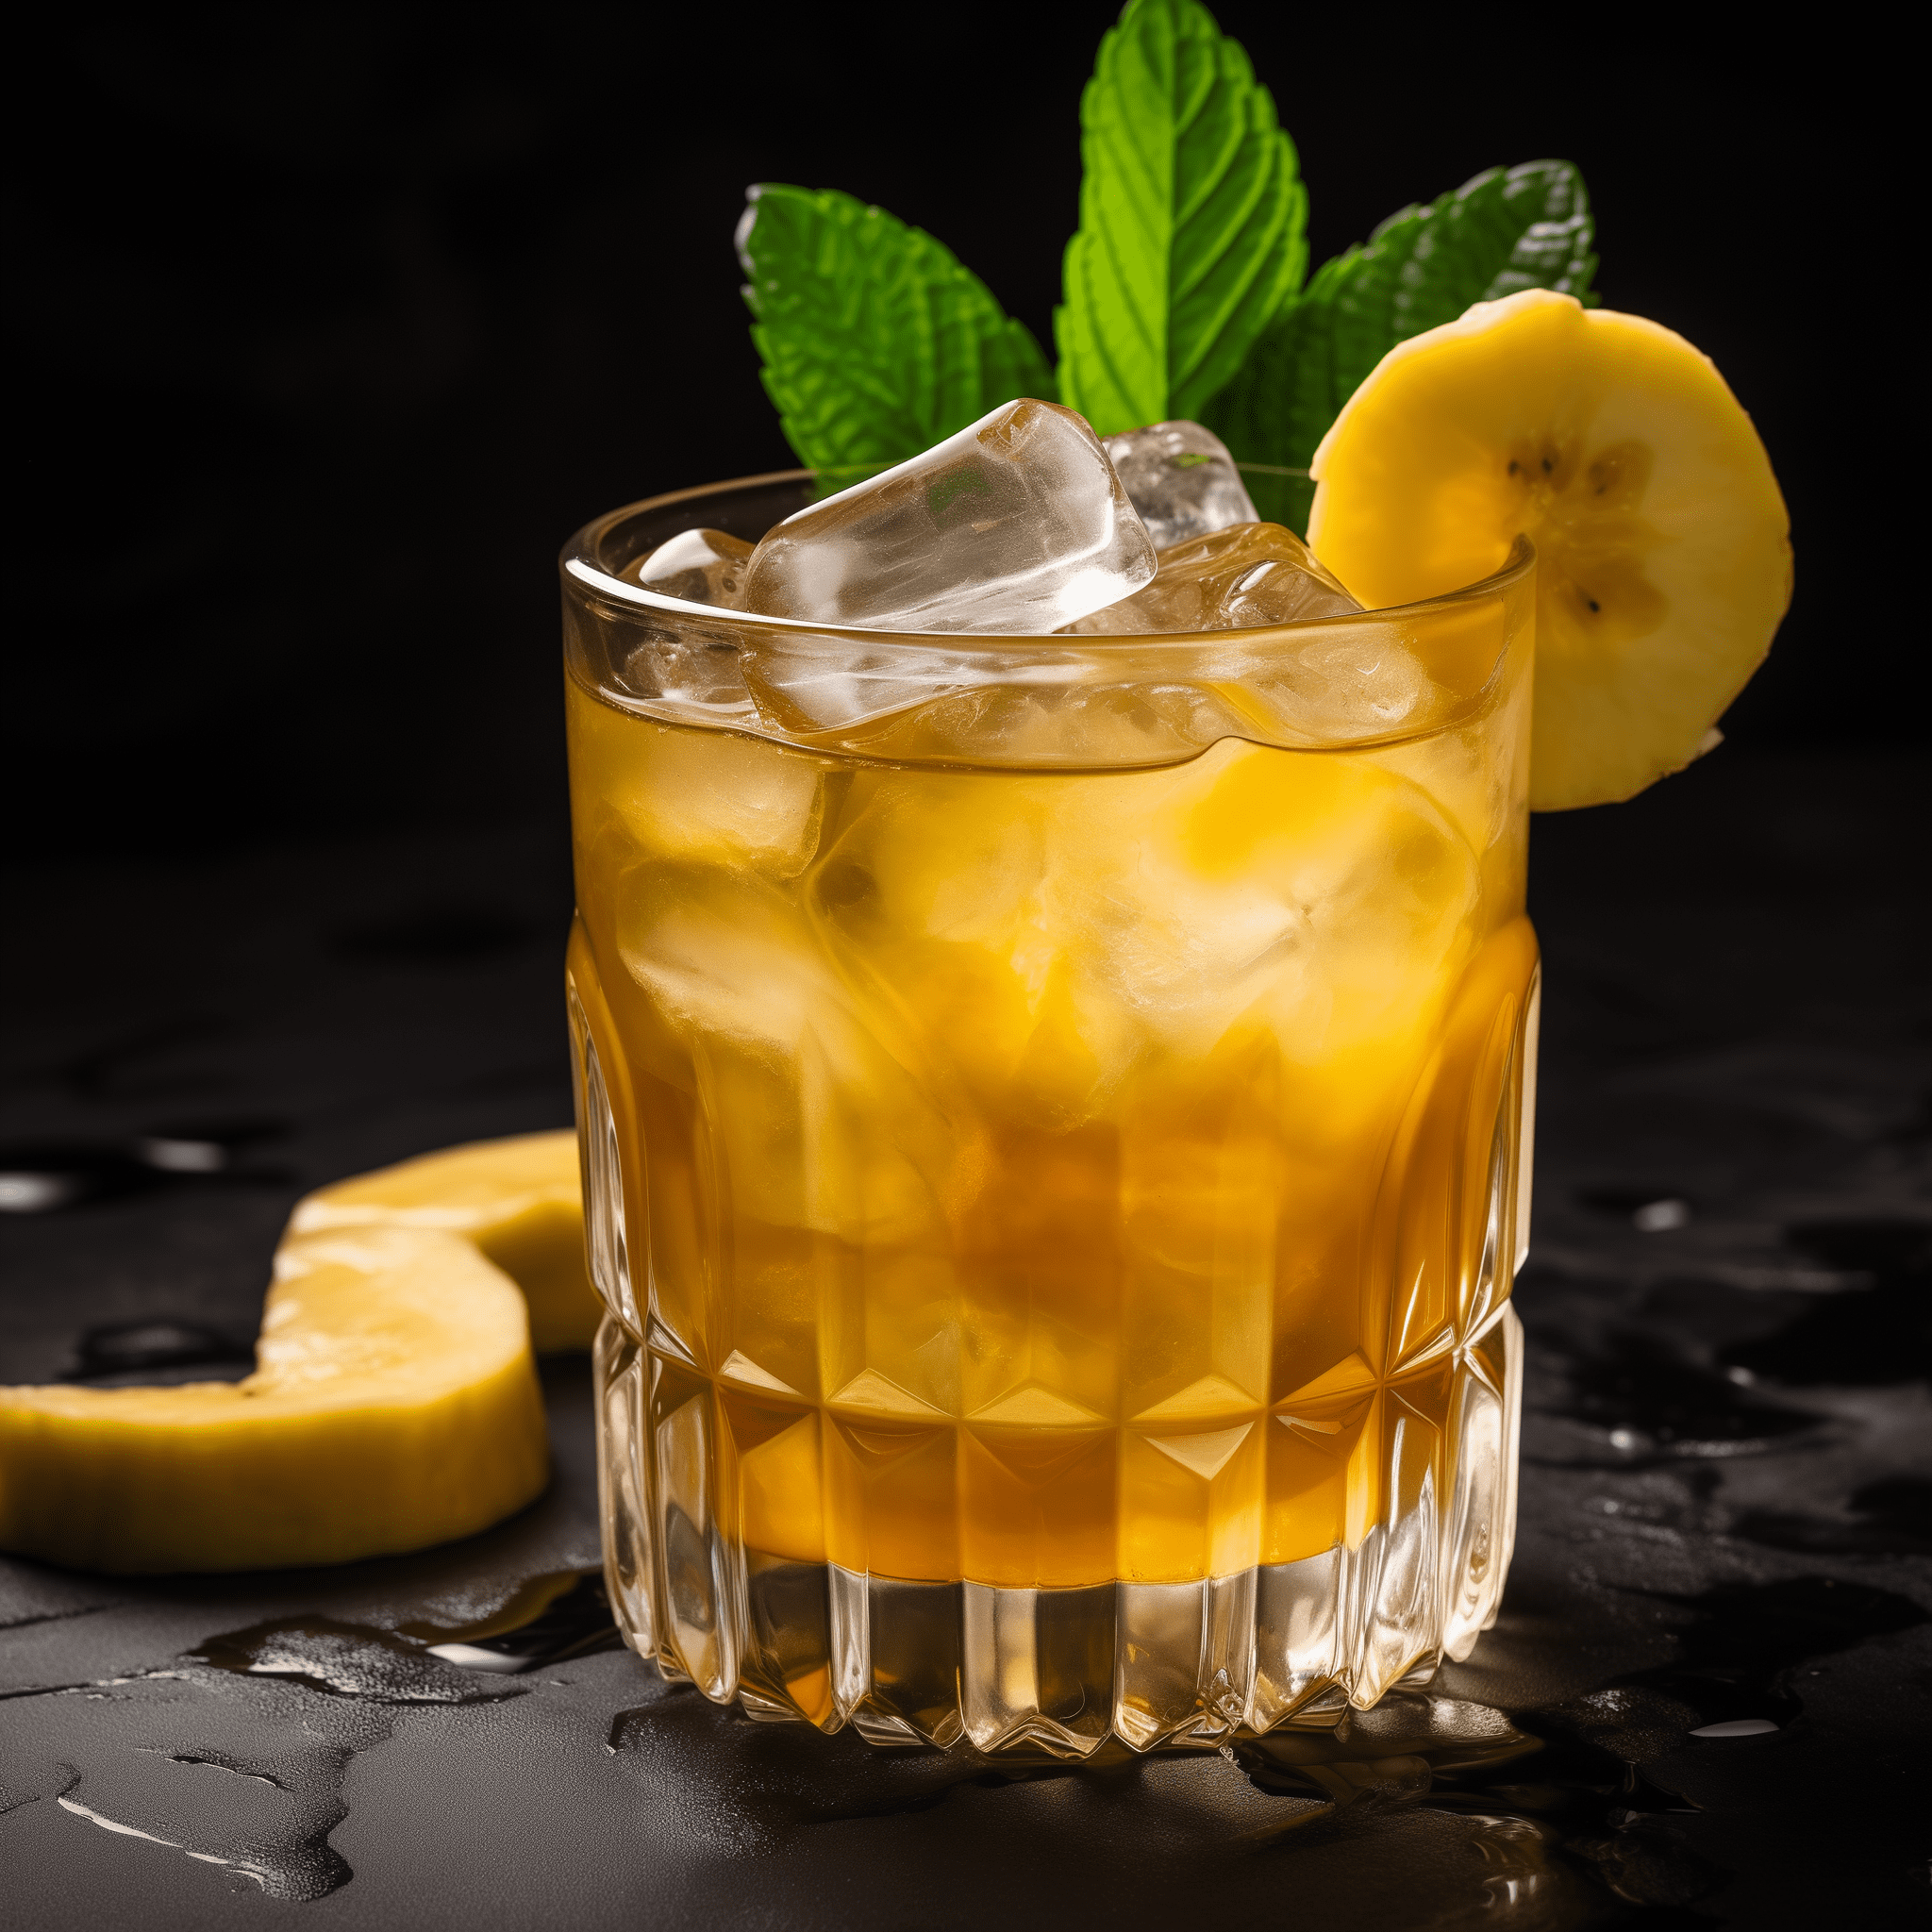 Banana Old Fashioned Cocktail Recipe - The Banana Old Fashioned offers a rich, velvety texture with a sweet, caramel-like banana flavor that balances the spicy, oak notes of the whiskey. It's a strong cocktail with a lingering, mellow fruit finish.